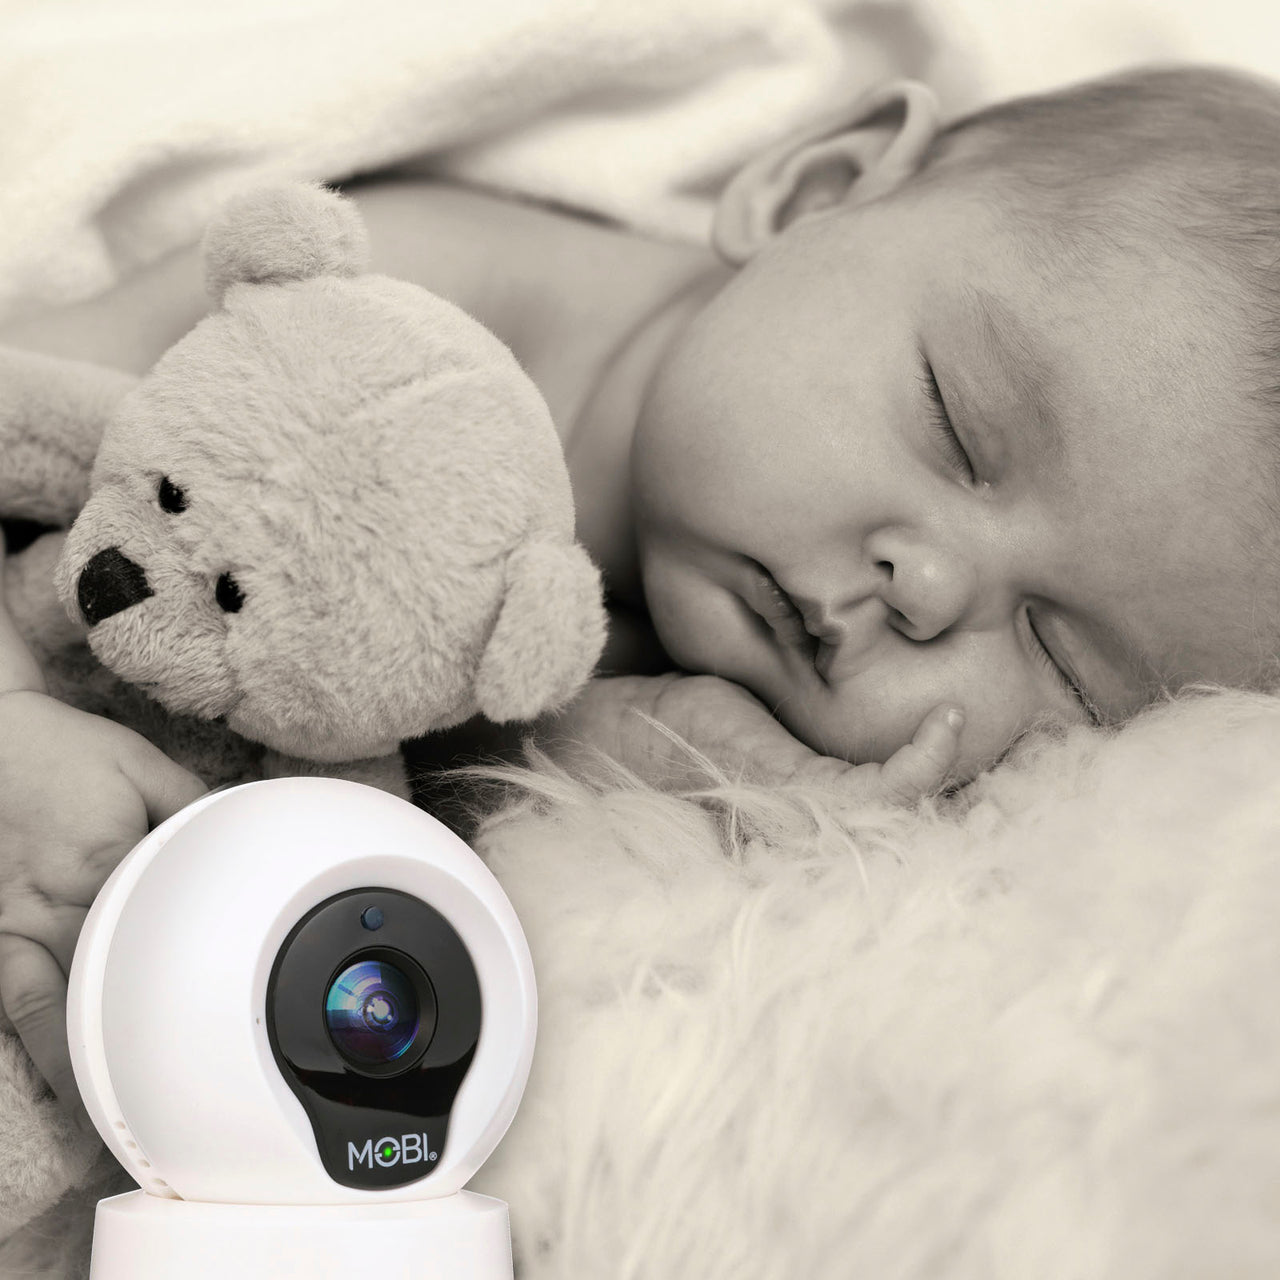 MOBI - Cam Multi-Purpose Smart HD Wi-Fi Baby Camera Monitor with 2-way Audio, Recording, and motion detection - White